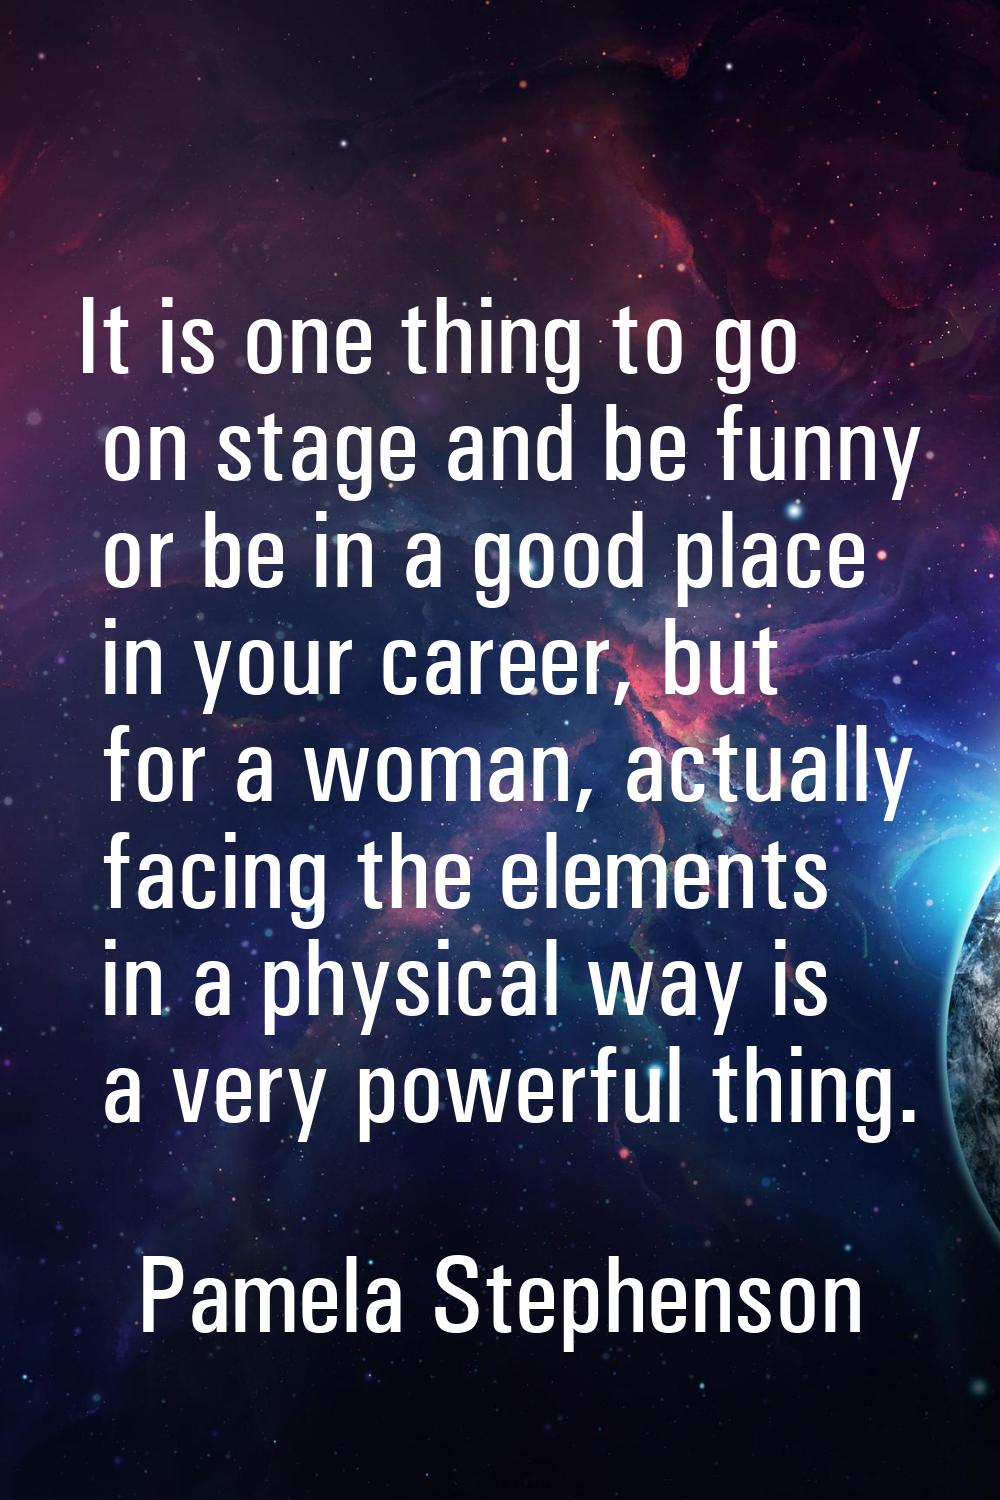 It is one thing to go on stage and be funny or be in a good place in your career, but for a woman, 